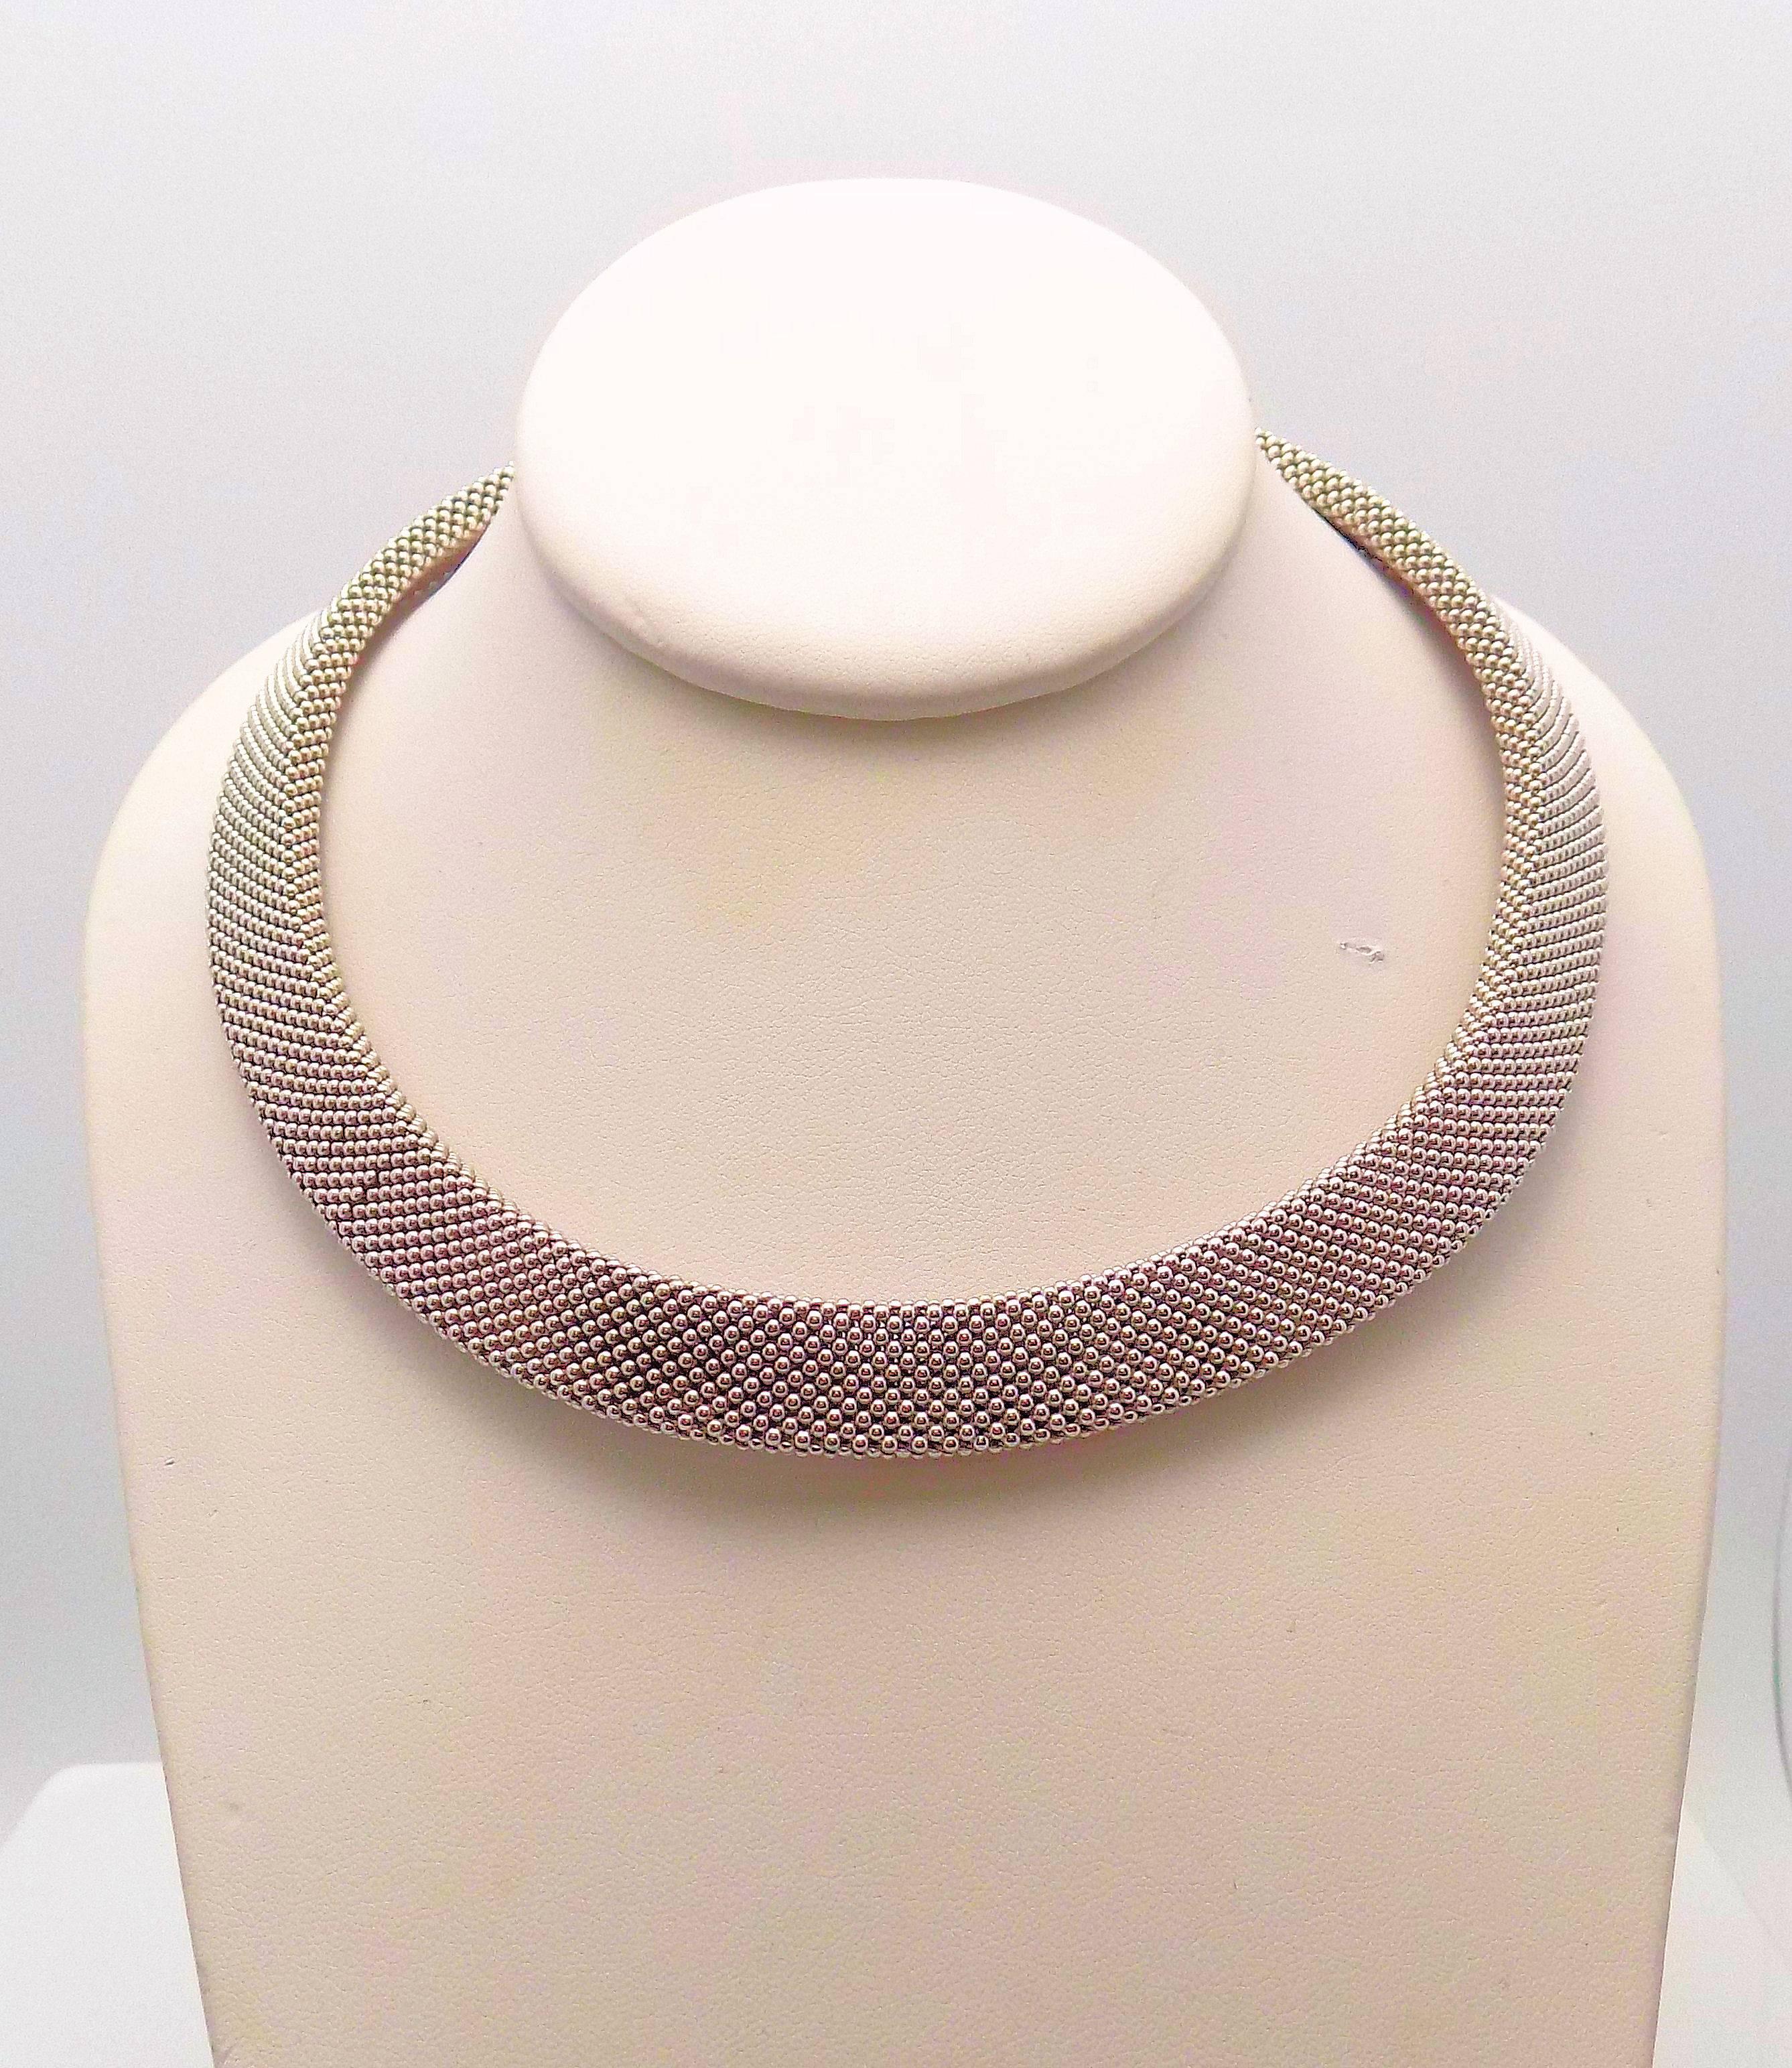 Classic Italian Design on this 14 Karat White Gold and 14 Karat Yellow Gold Woven Necklace 13.5 MM Wide, Length 17